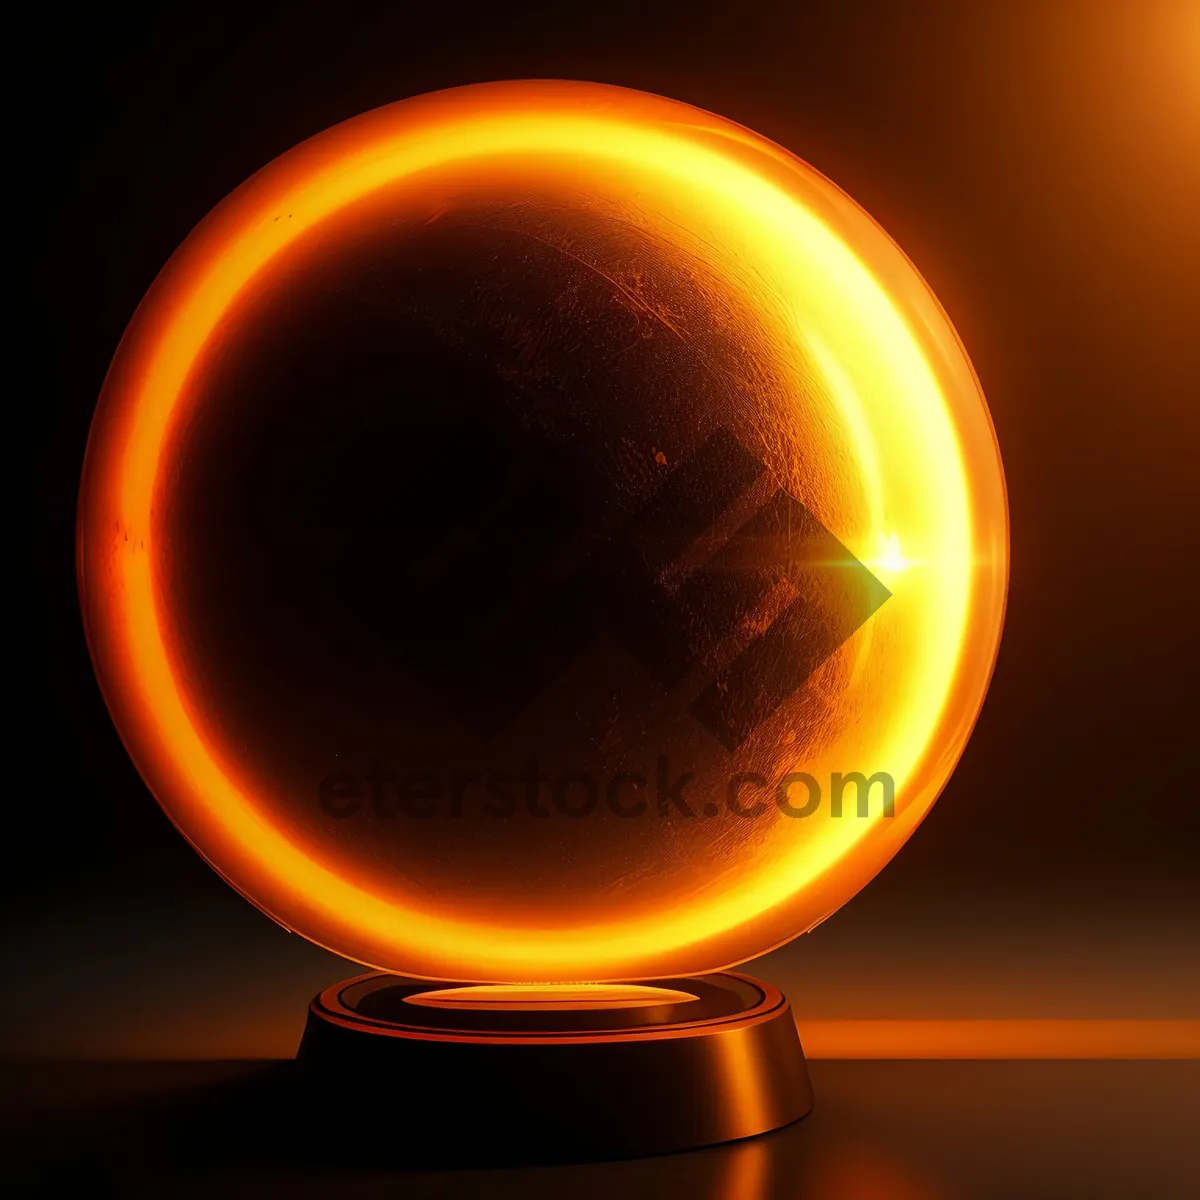 Picture of Flaming Orange Design: Vibrant Heat and Light